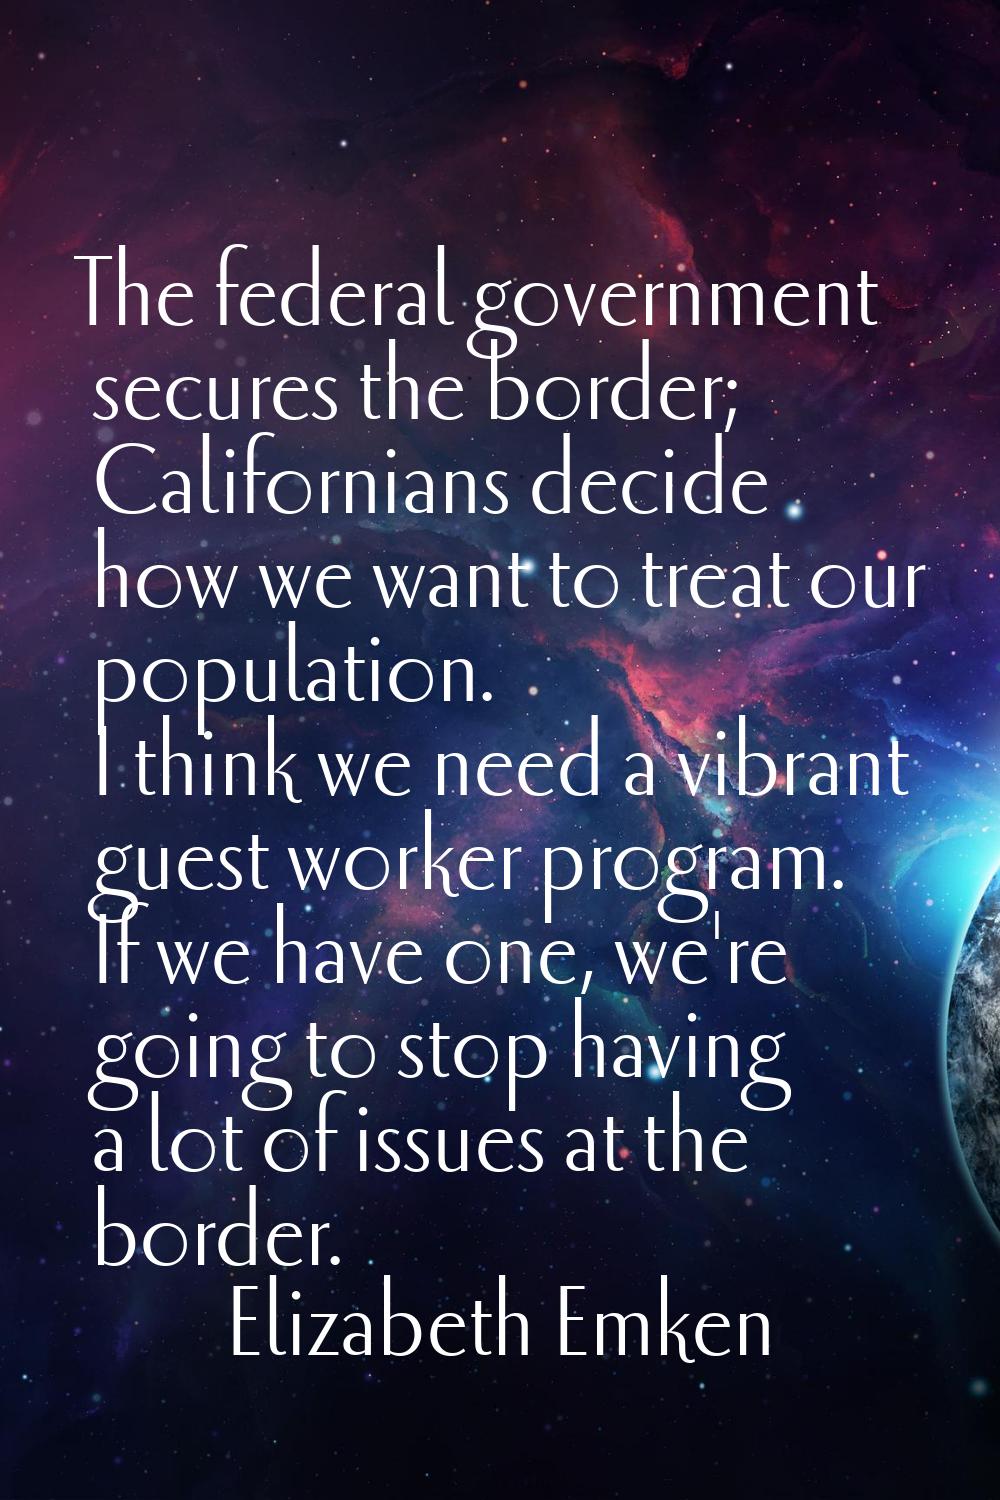 The federal government secures the border; Californians decide how we want to treat our population.